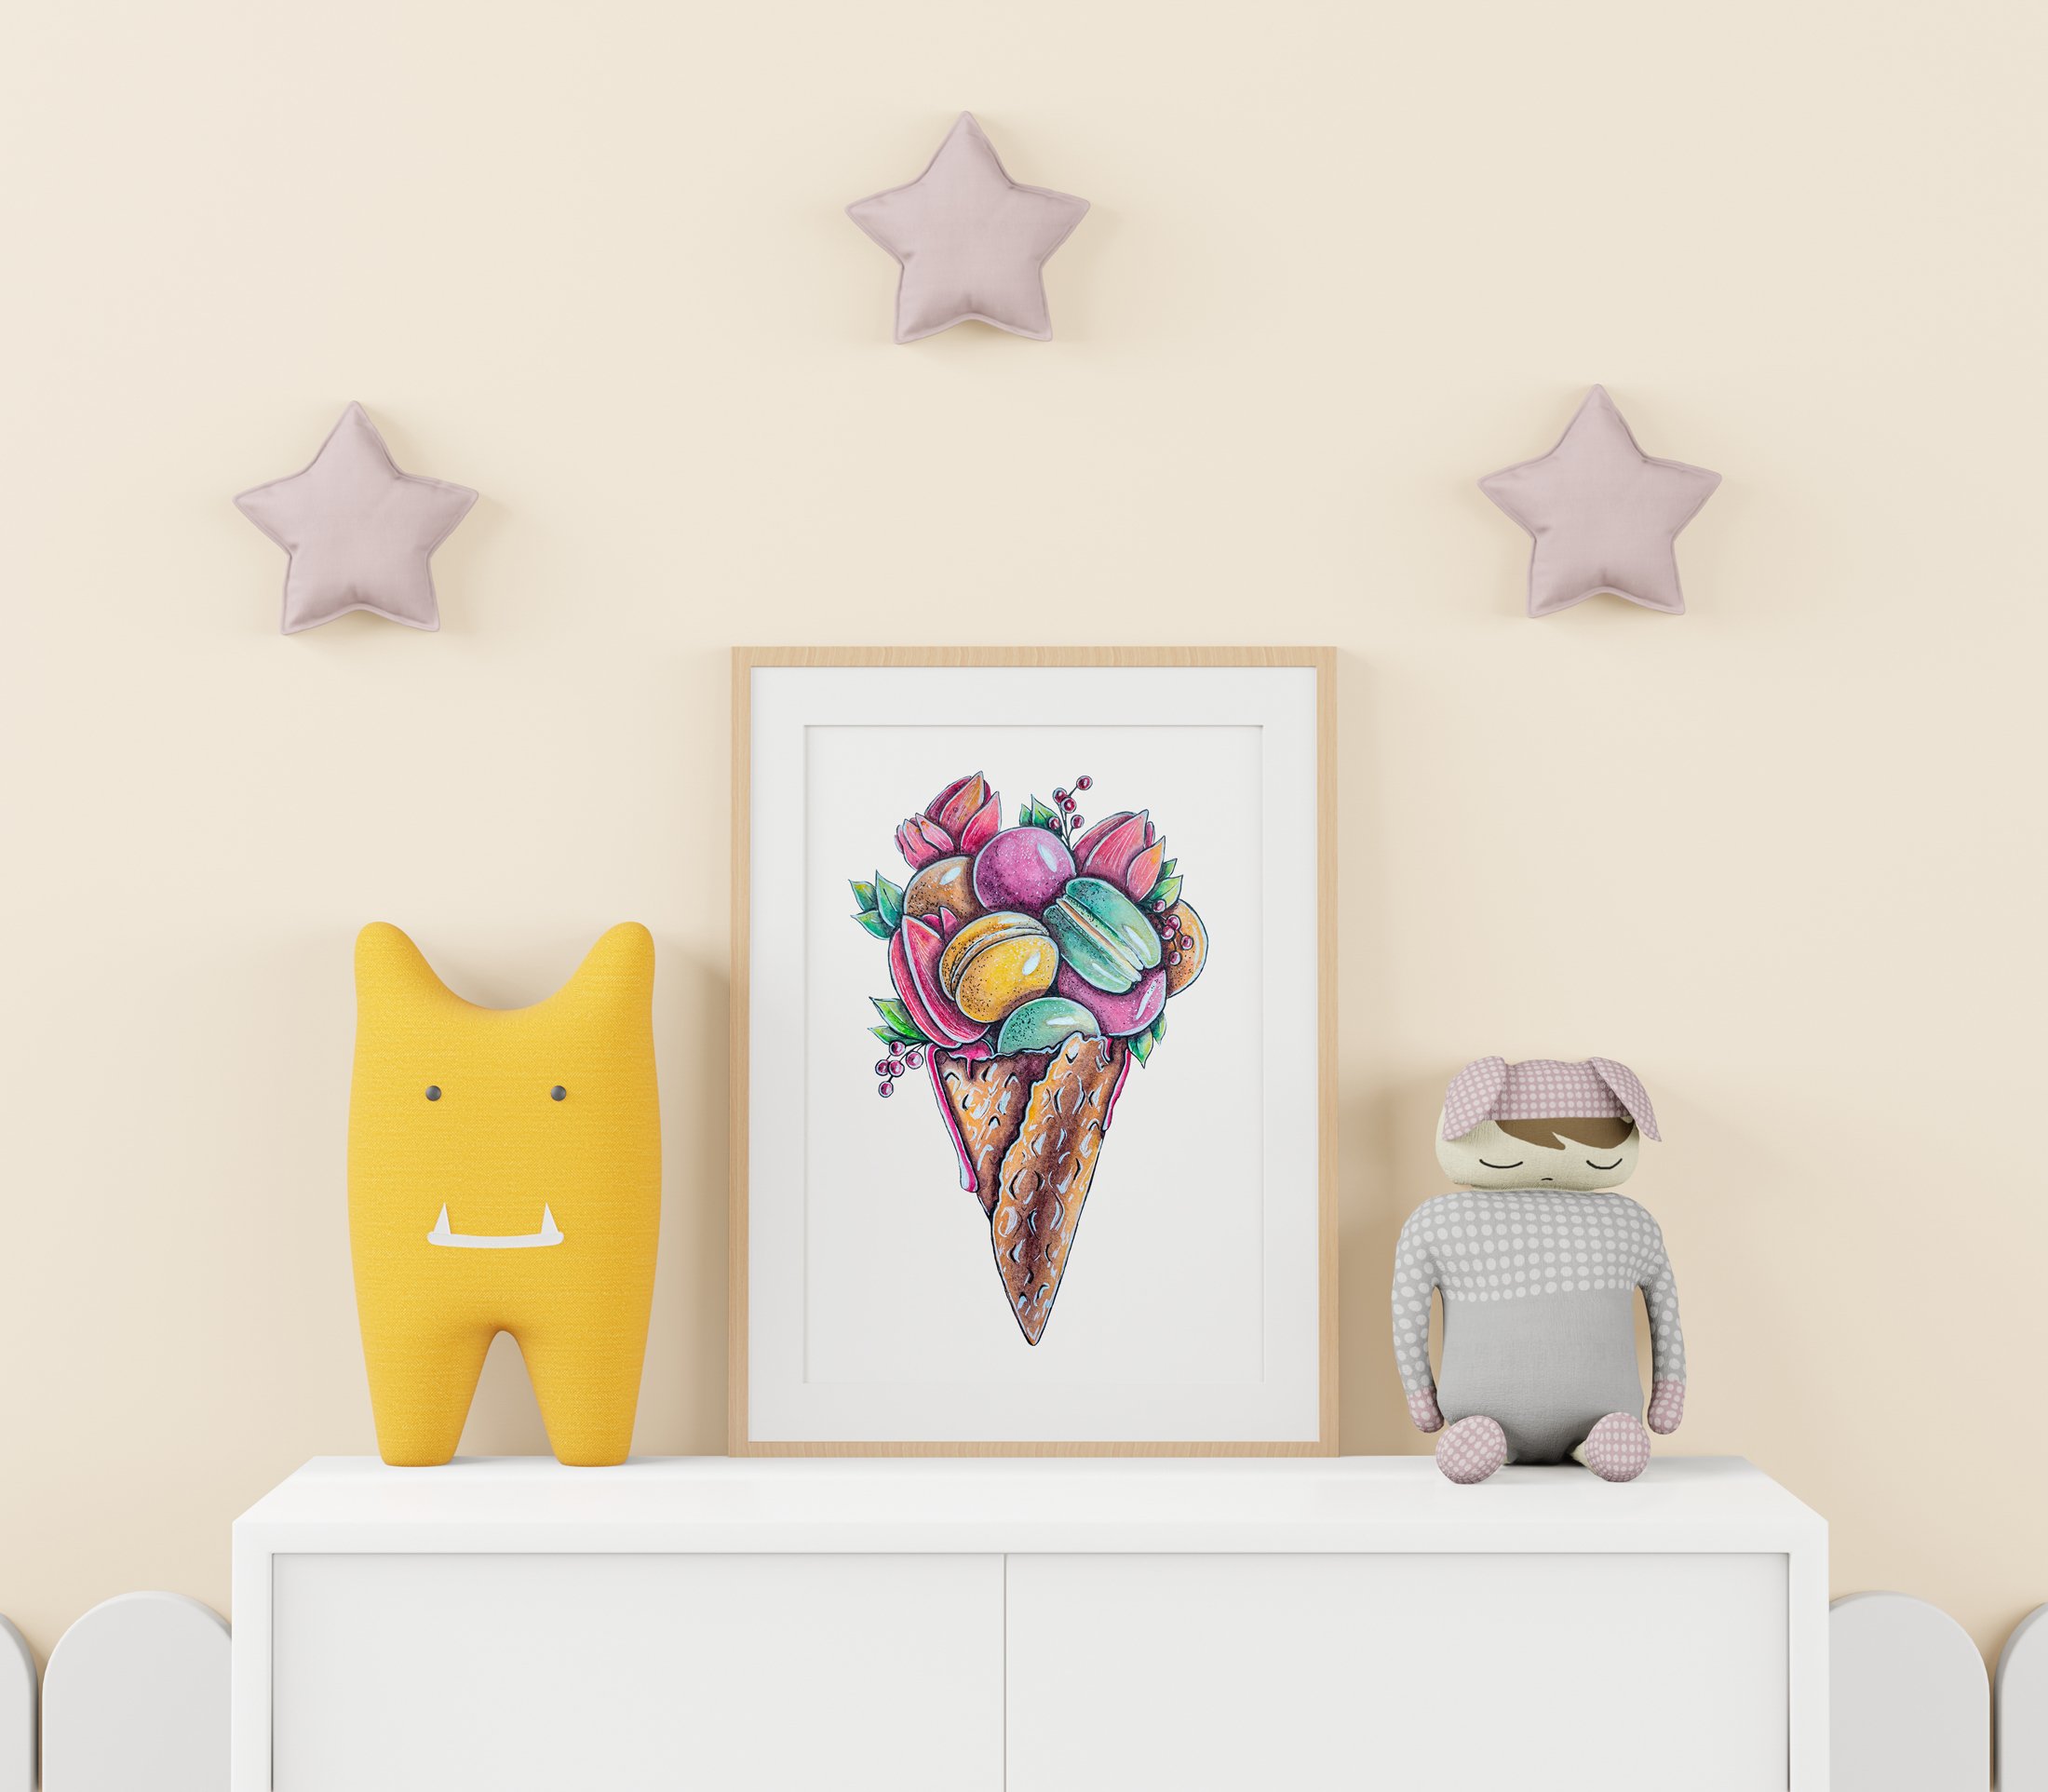 Cute poster with an ice cream.